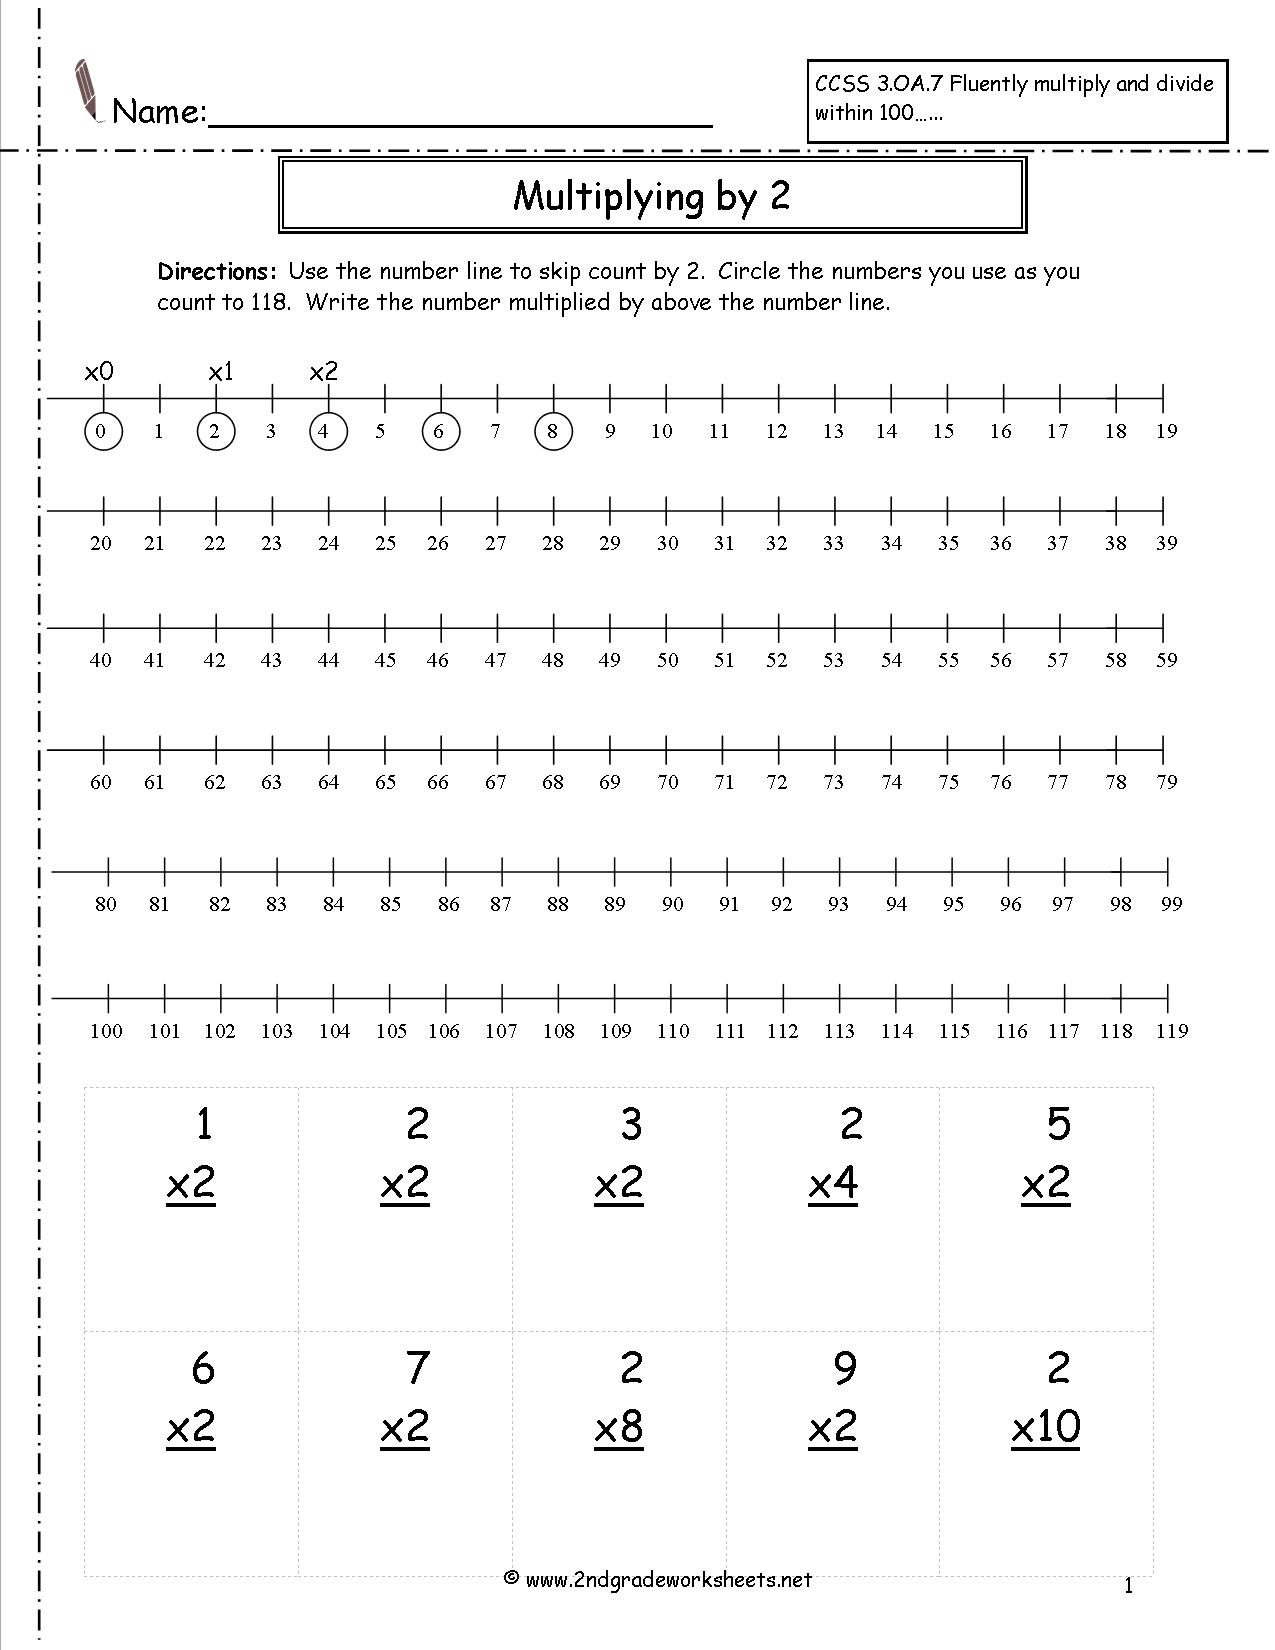 7-best-images-of-mental-math-to-multiply-worksheets-repeated-addition-worksheets-number-line